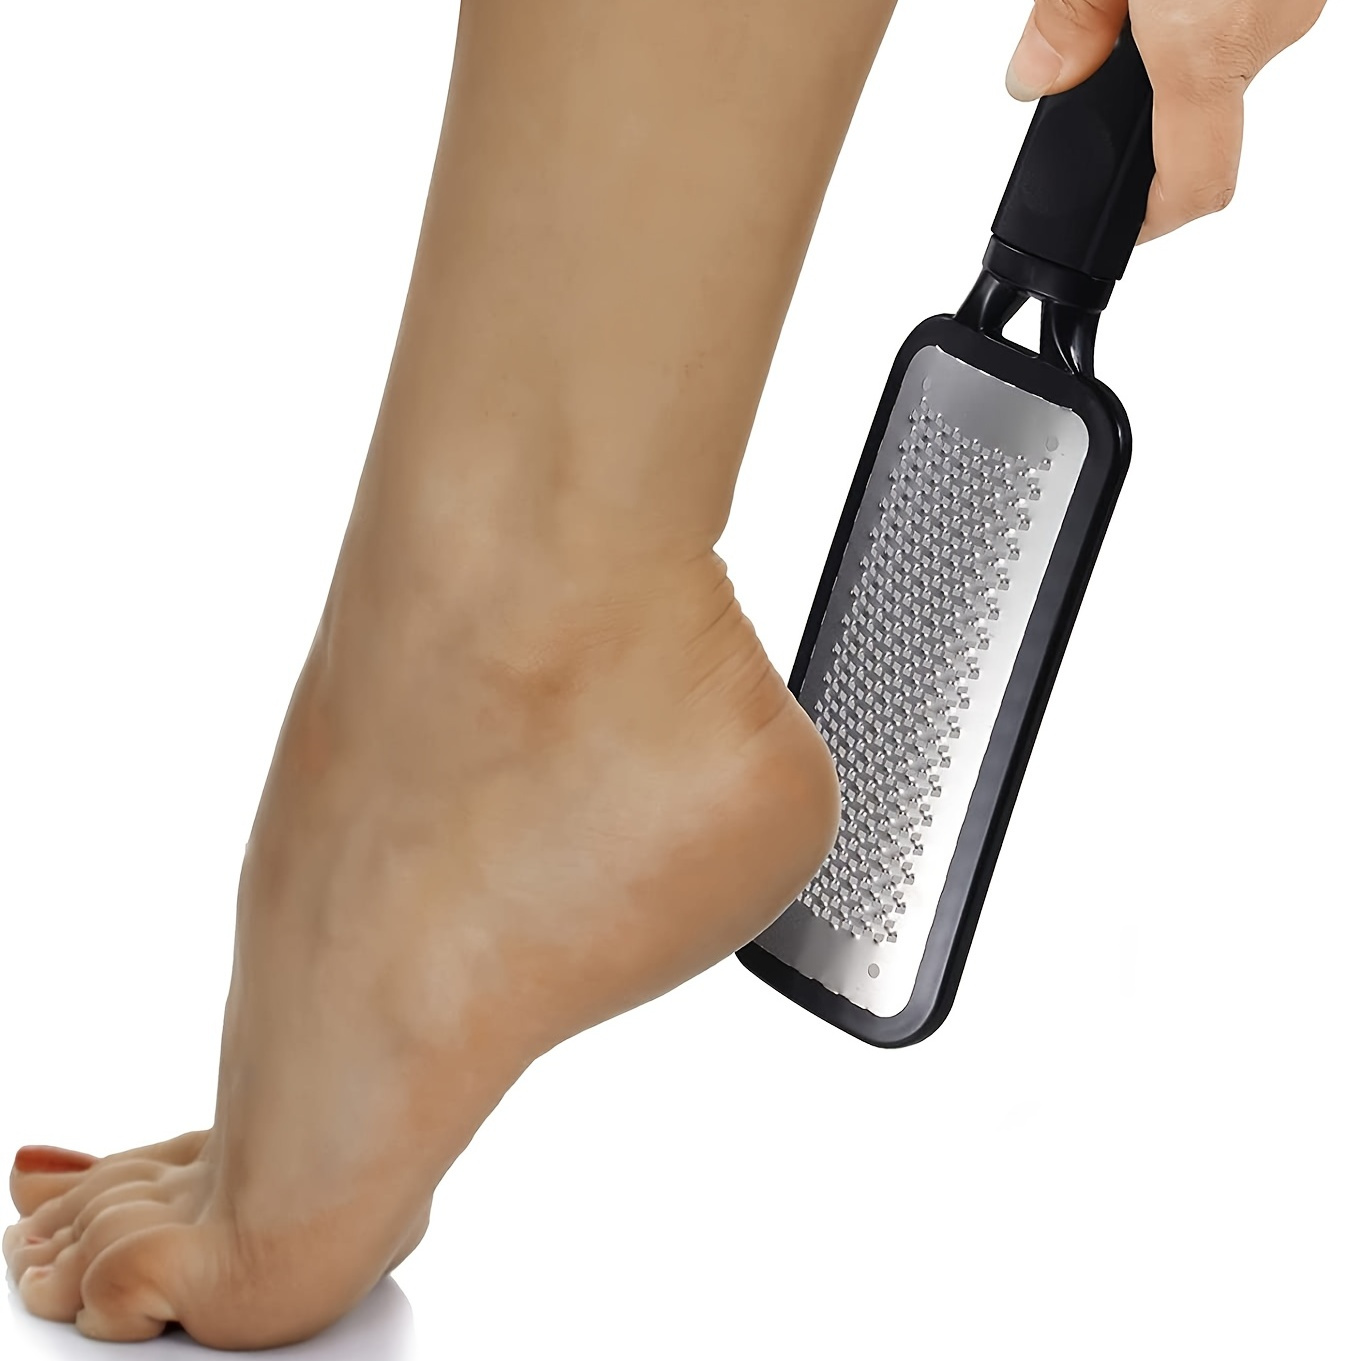 

Foot Rasp Foot File And Callus Remover. Best Foot Care Pedicure Metal Surface Tool To Remove Hard Skin. Can Be Used On Both Wet And Dry Feet, Grade Stainless Steel File Gift Of Father